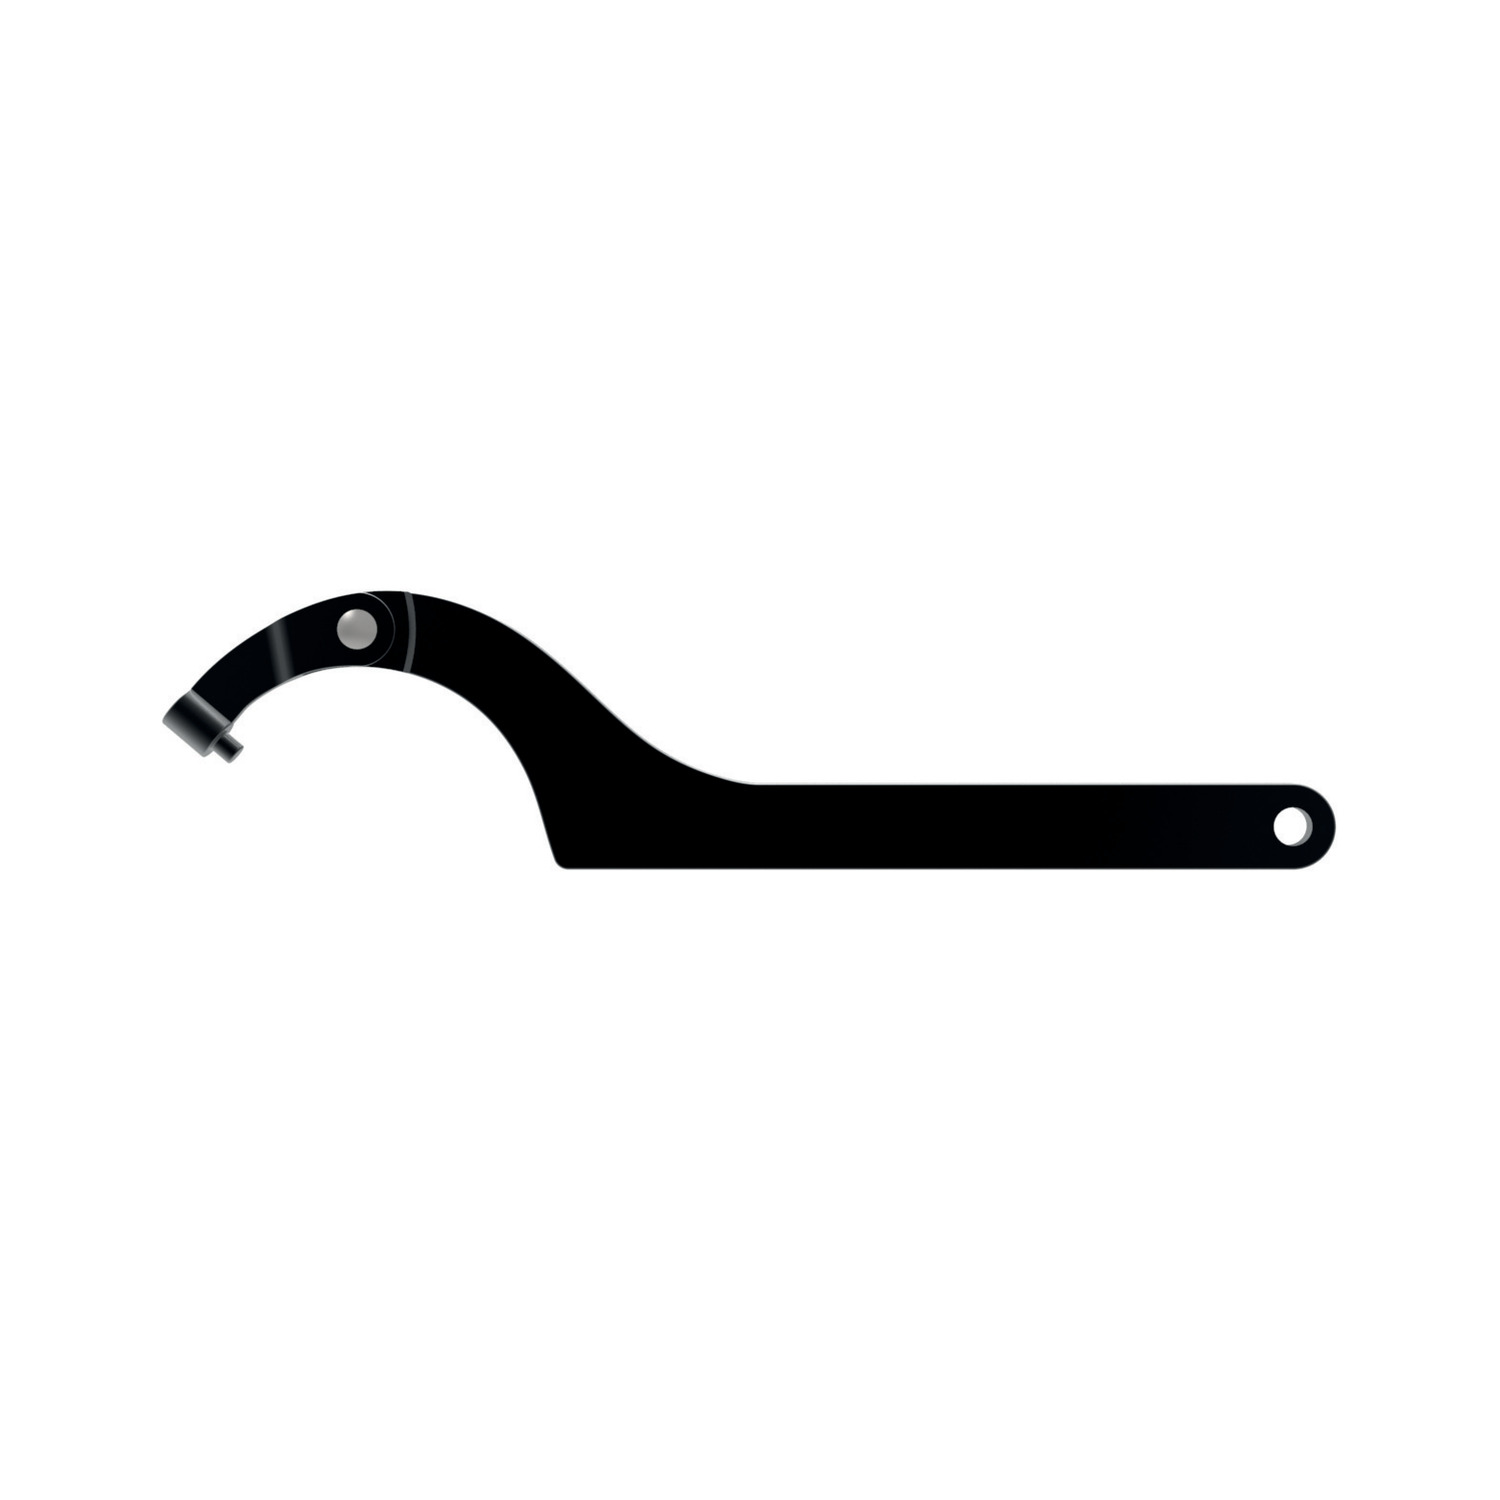 95151.W0091 Hook Spanners, With Pin Nose - Steel. Blackened - 60-90 - 6,0 - 245